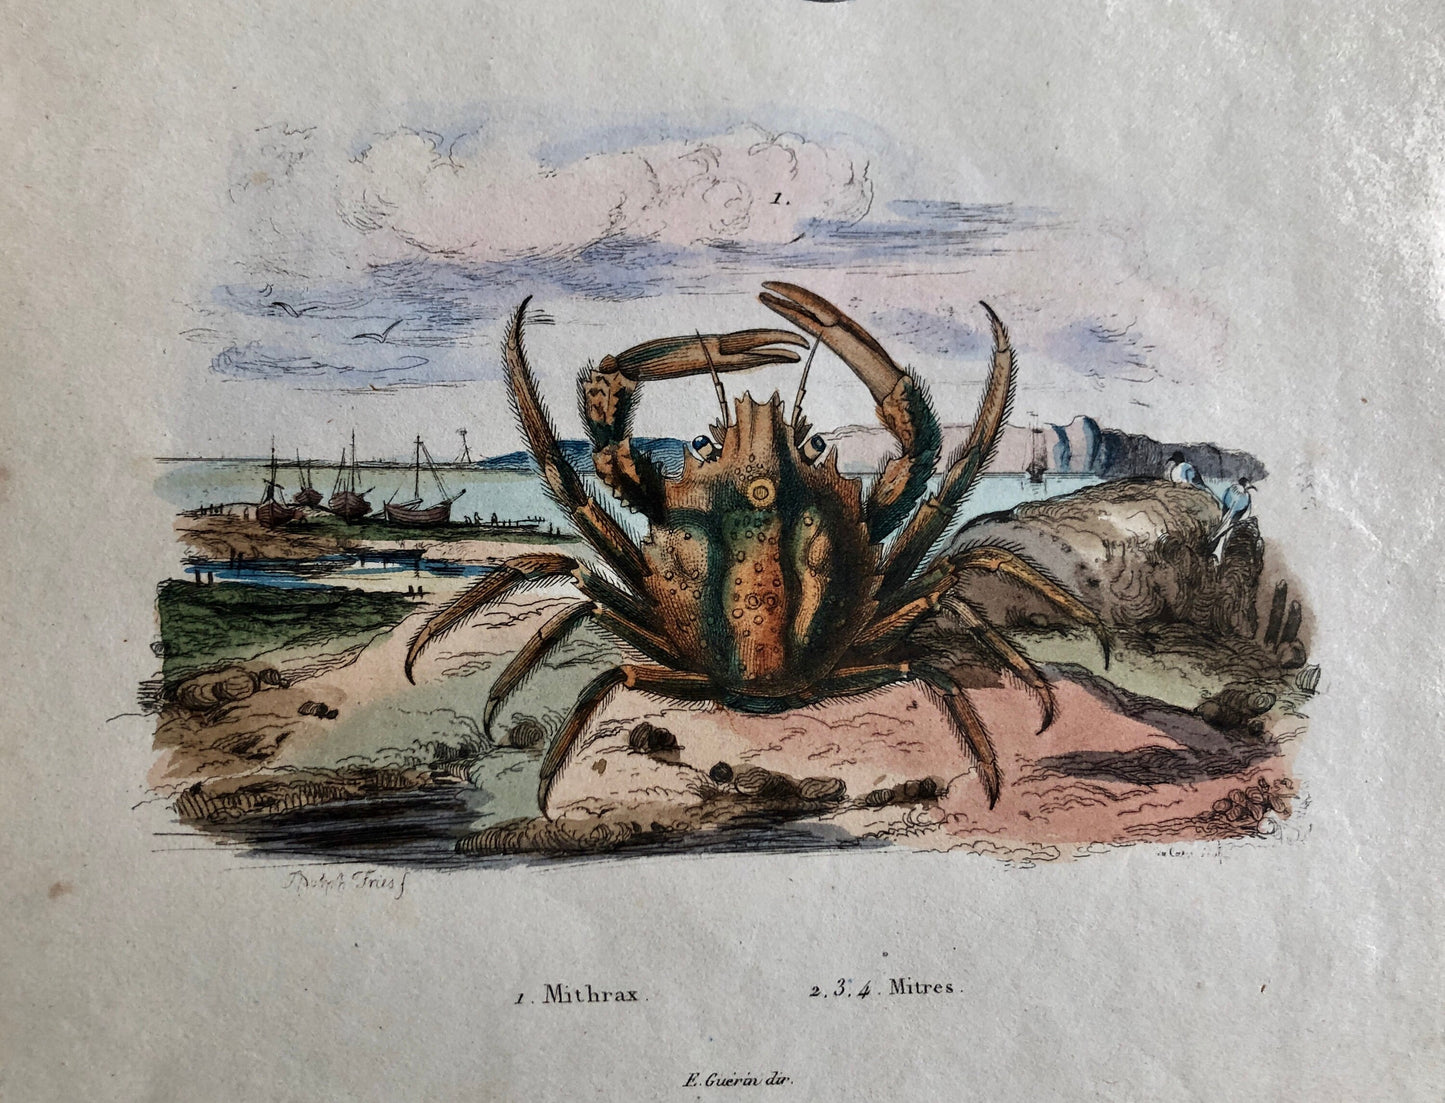 Three Antique Prints From a French Dictionary. A Squid, a Jellyfish, a Crab, Shells, Insects. Hand coloured Lithographs. Size: 29 x 18 cms.